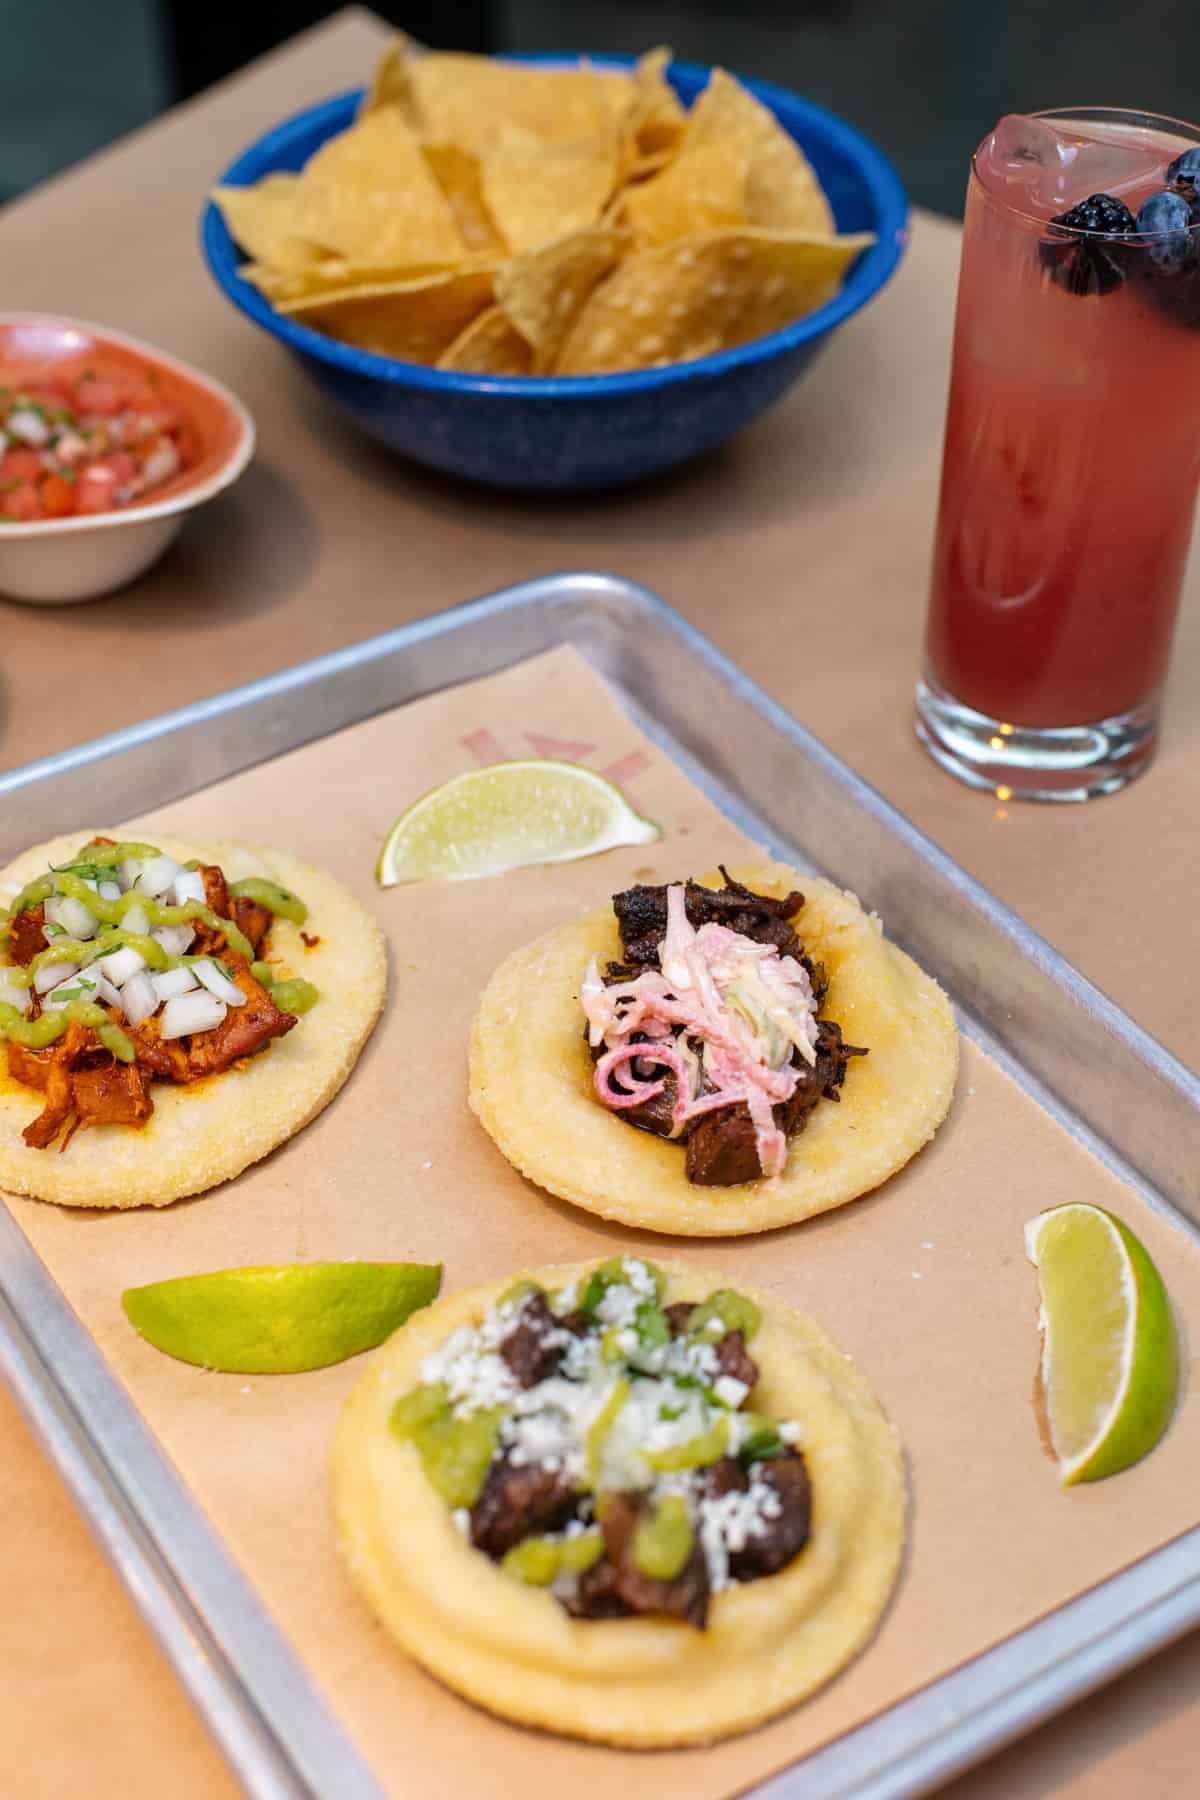 From hole-in-the-wall to upscale and inventive, we've rounded up the taco shops of your dreams in our guide to the 10 Best Tacos in Denver!